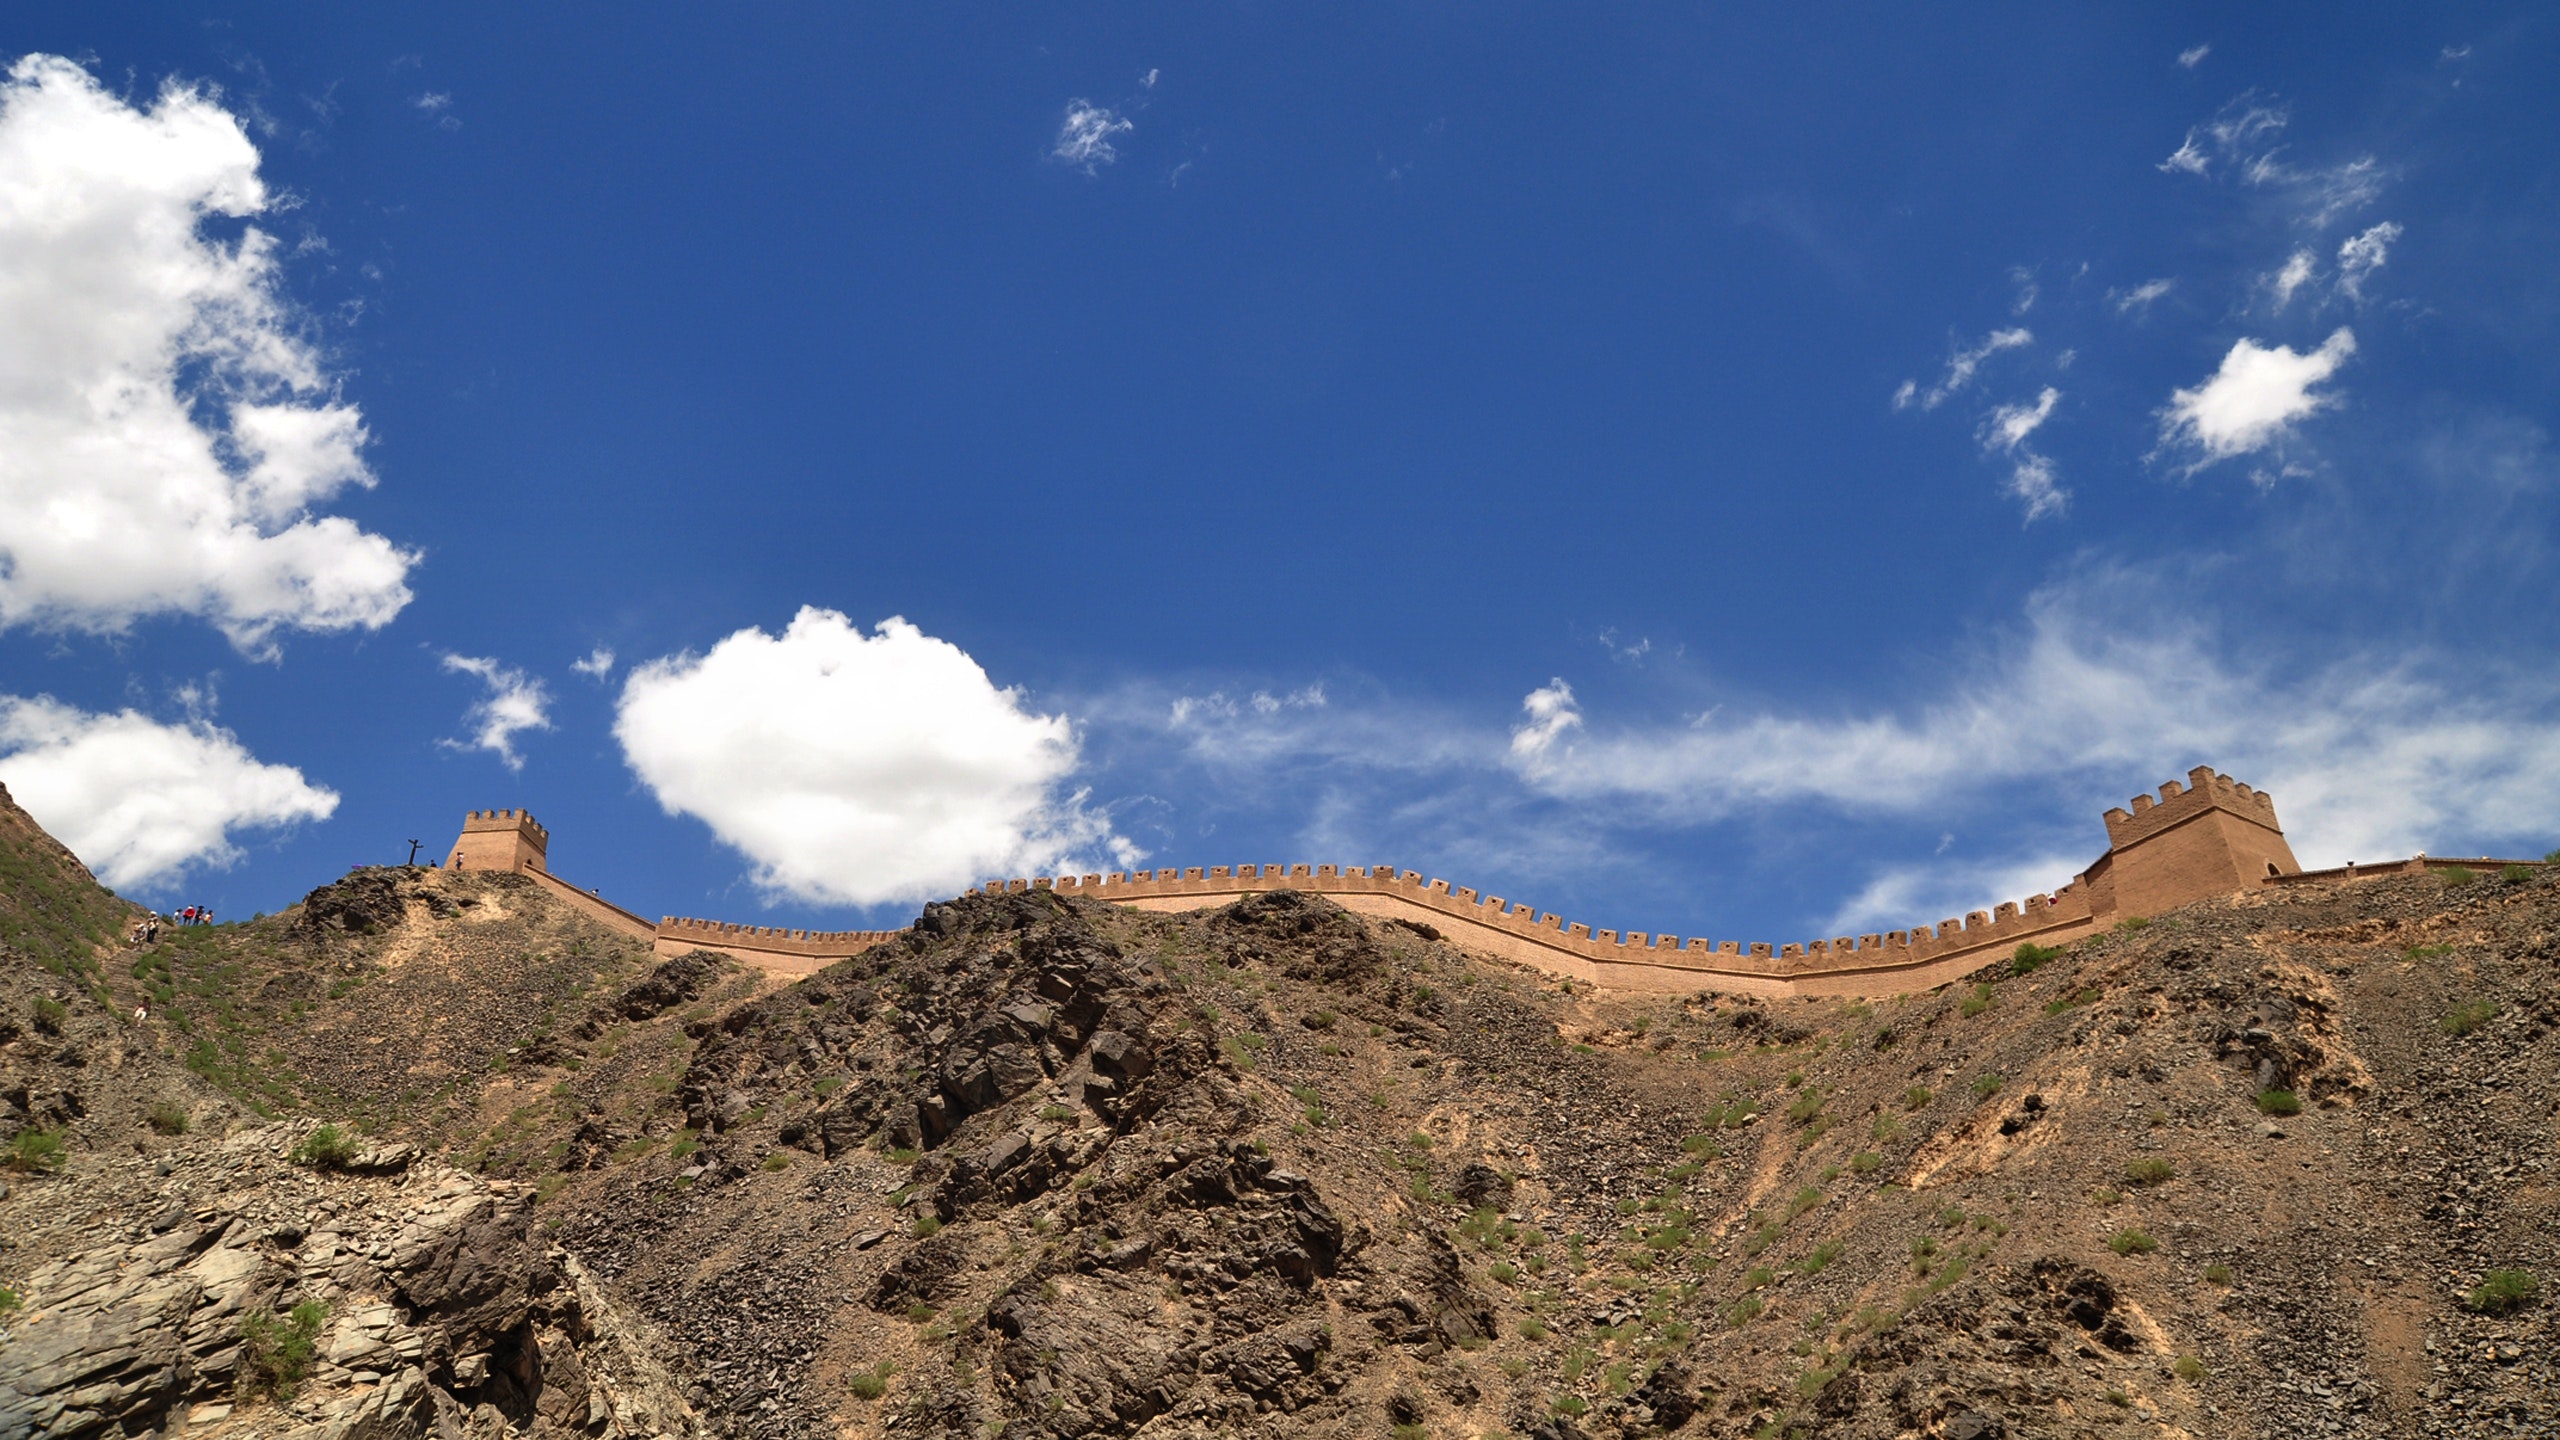 Great wall of china during daytime photo